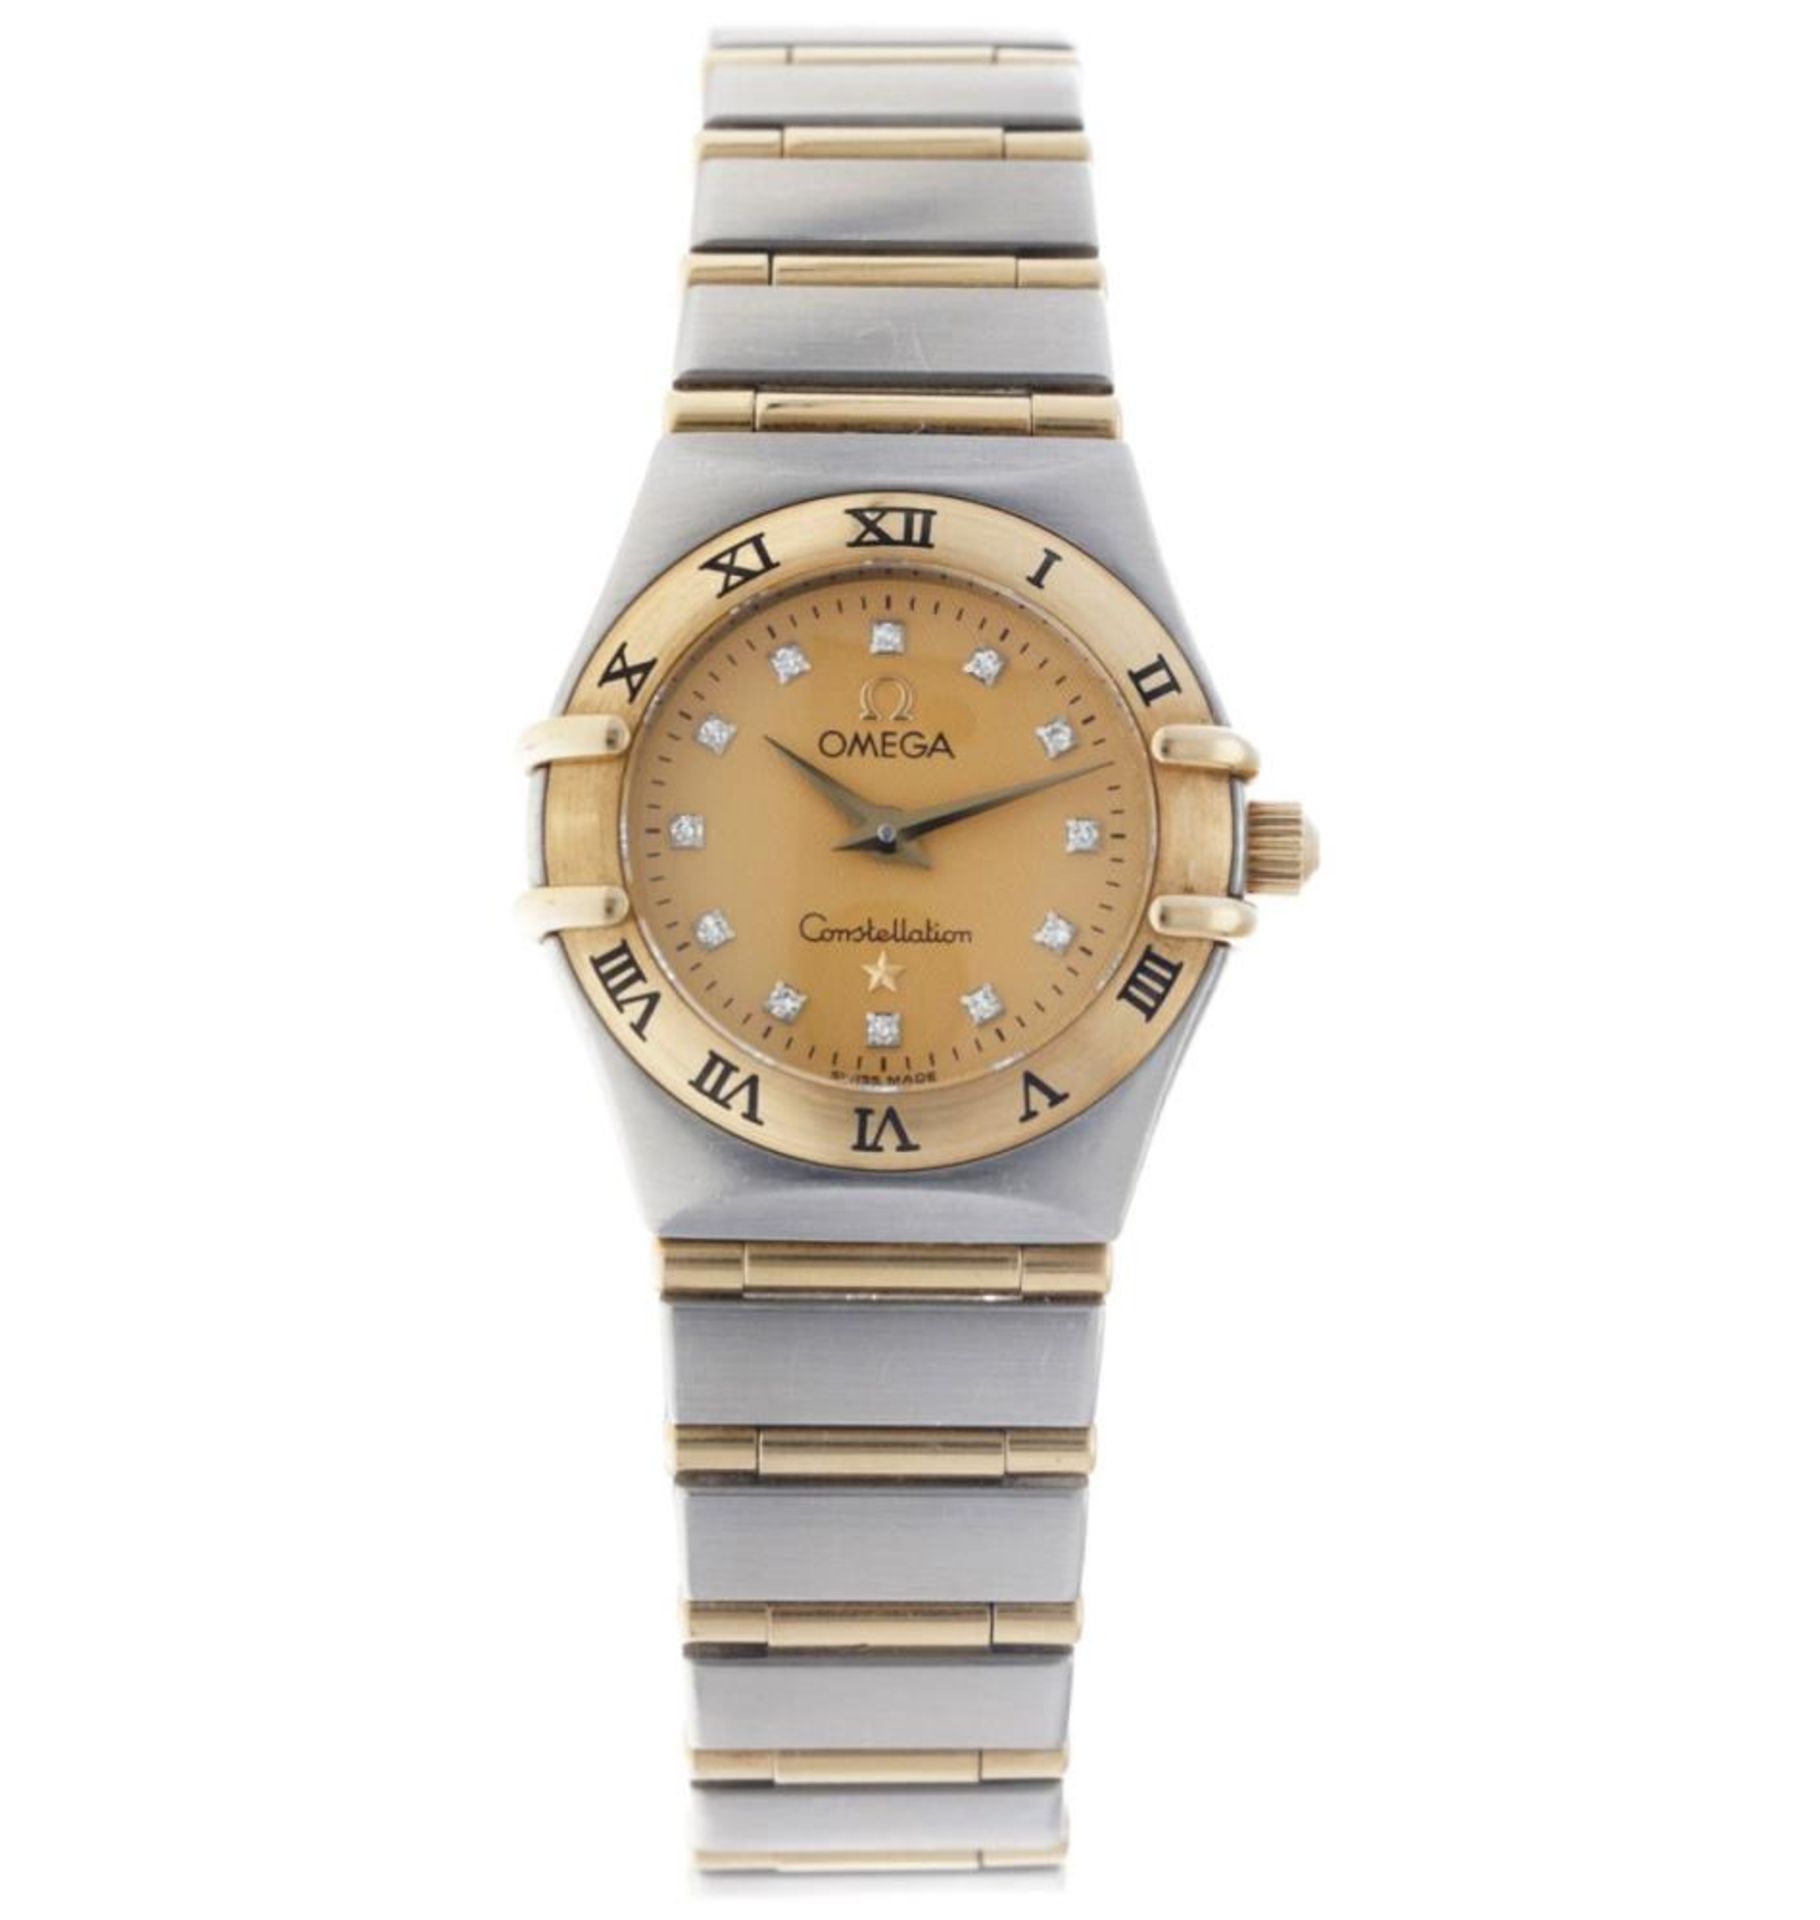 Omega Constellation - Ladies watch - approx. 2010.